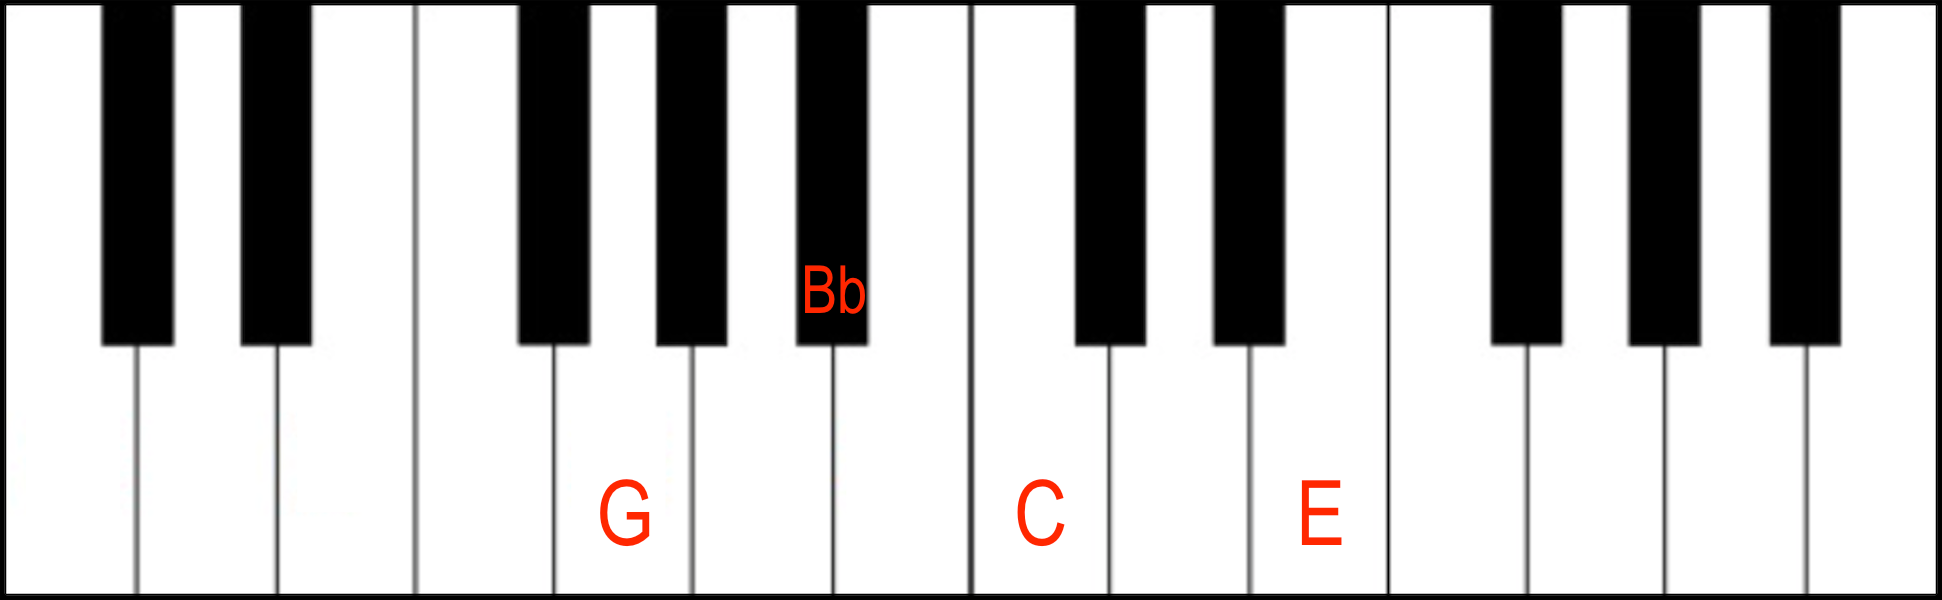 C7 Dominant 7th Chord in 2nd Inversion